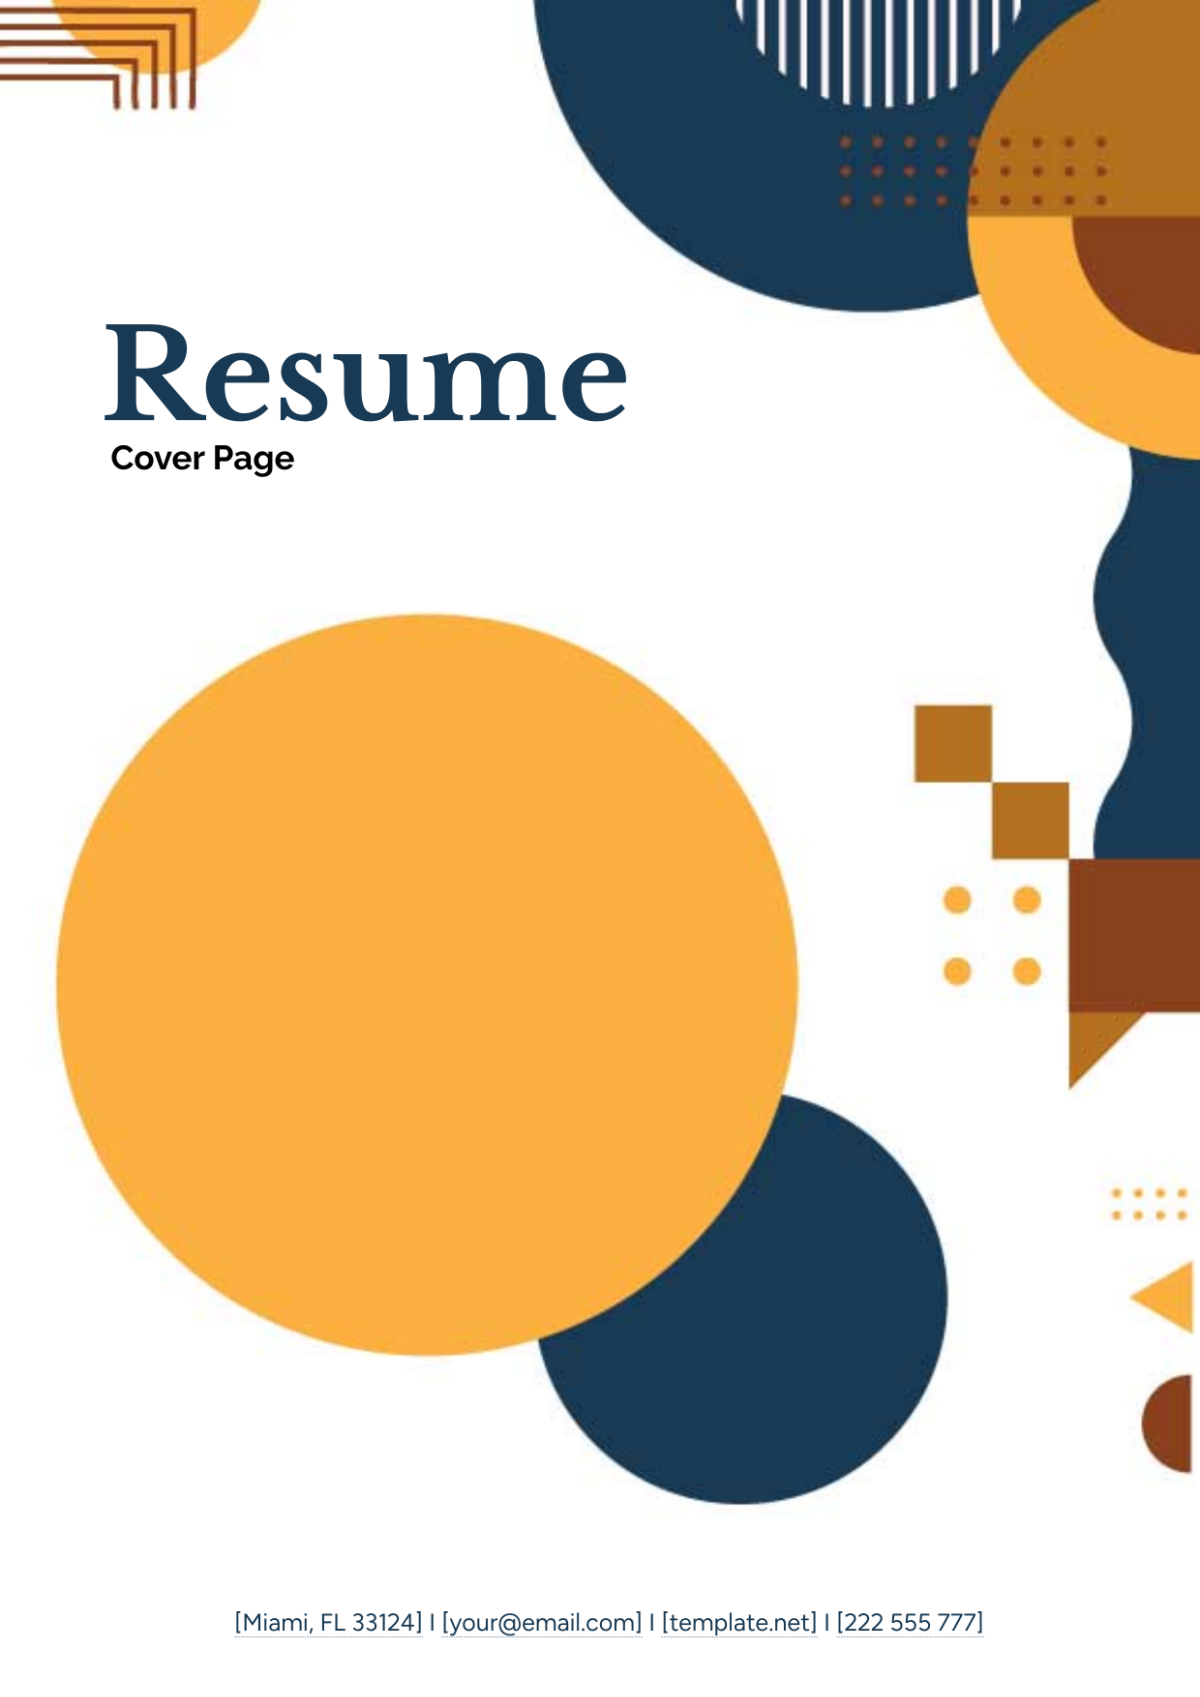 Resume Cover Page Template